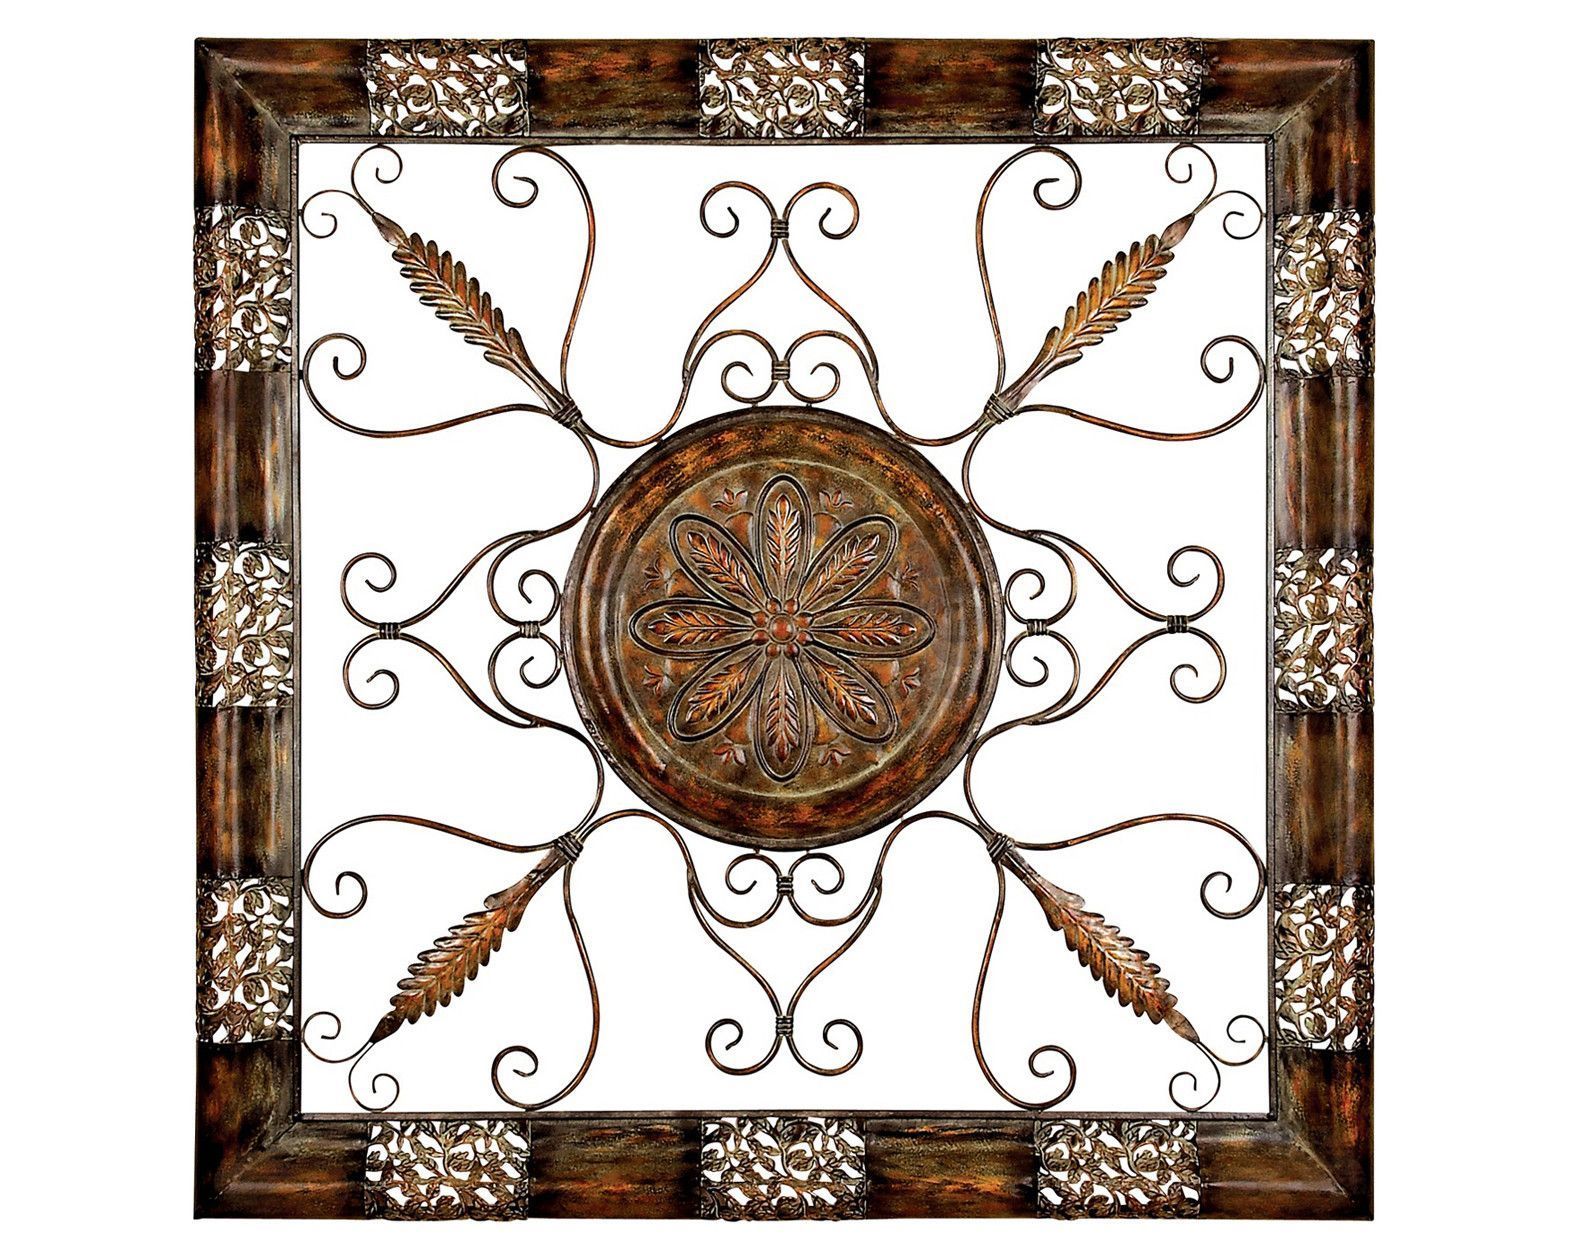 Rustic Grille Square Decorative Art | Metal Sculpture Wall Art, Wrought Throughout Square Brass Wall Art (View 1 of 15)